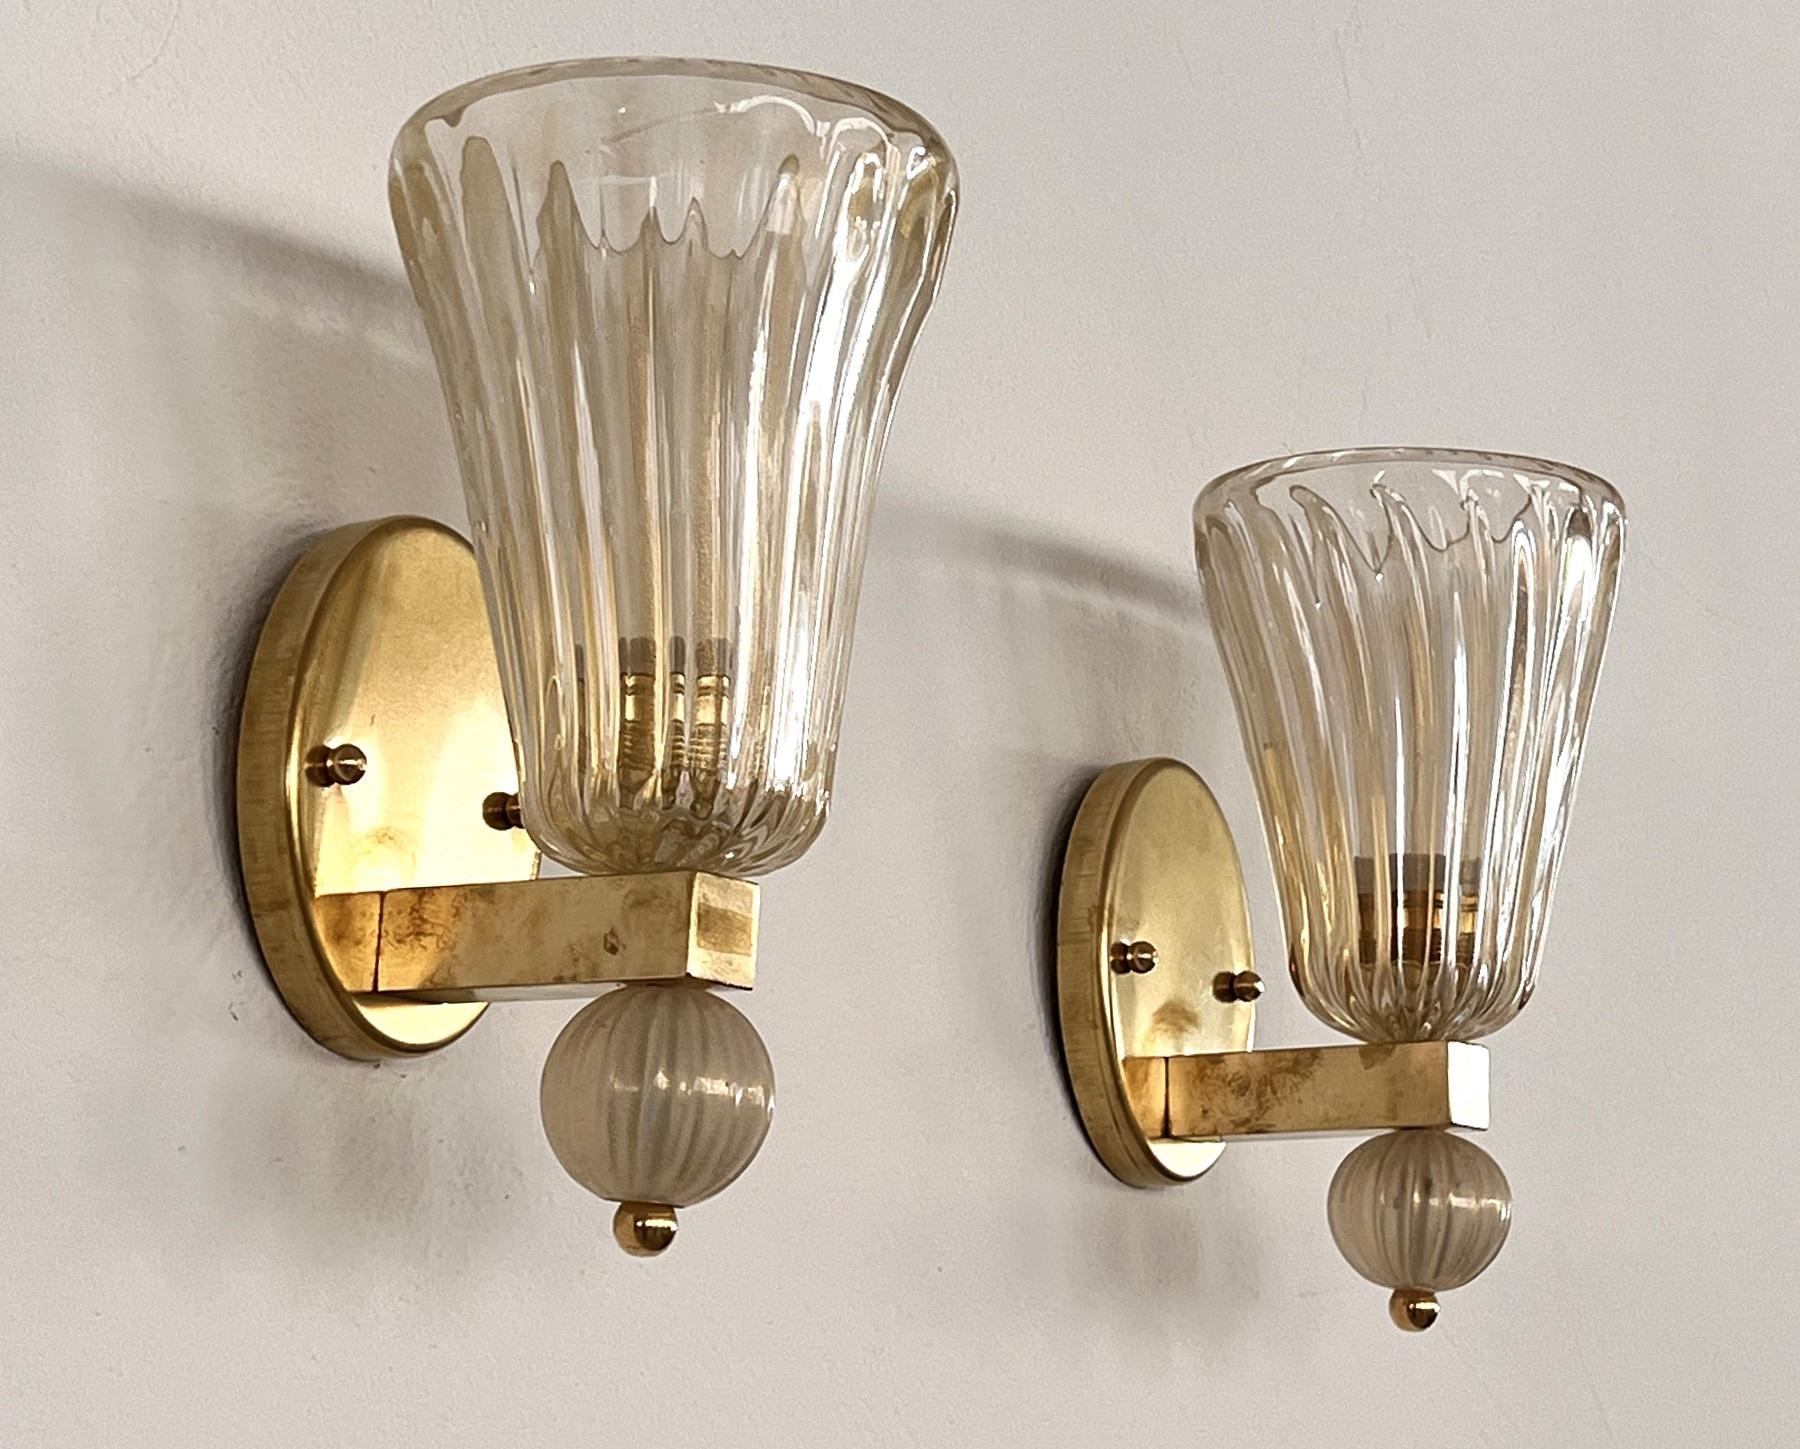 20th Century Italian Brass and Murano Glass Wall Lights or Sconces in Art Deco Style, 1990s For Sale